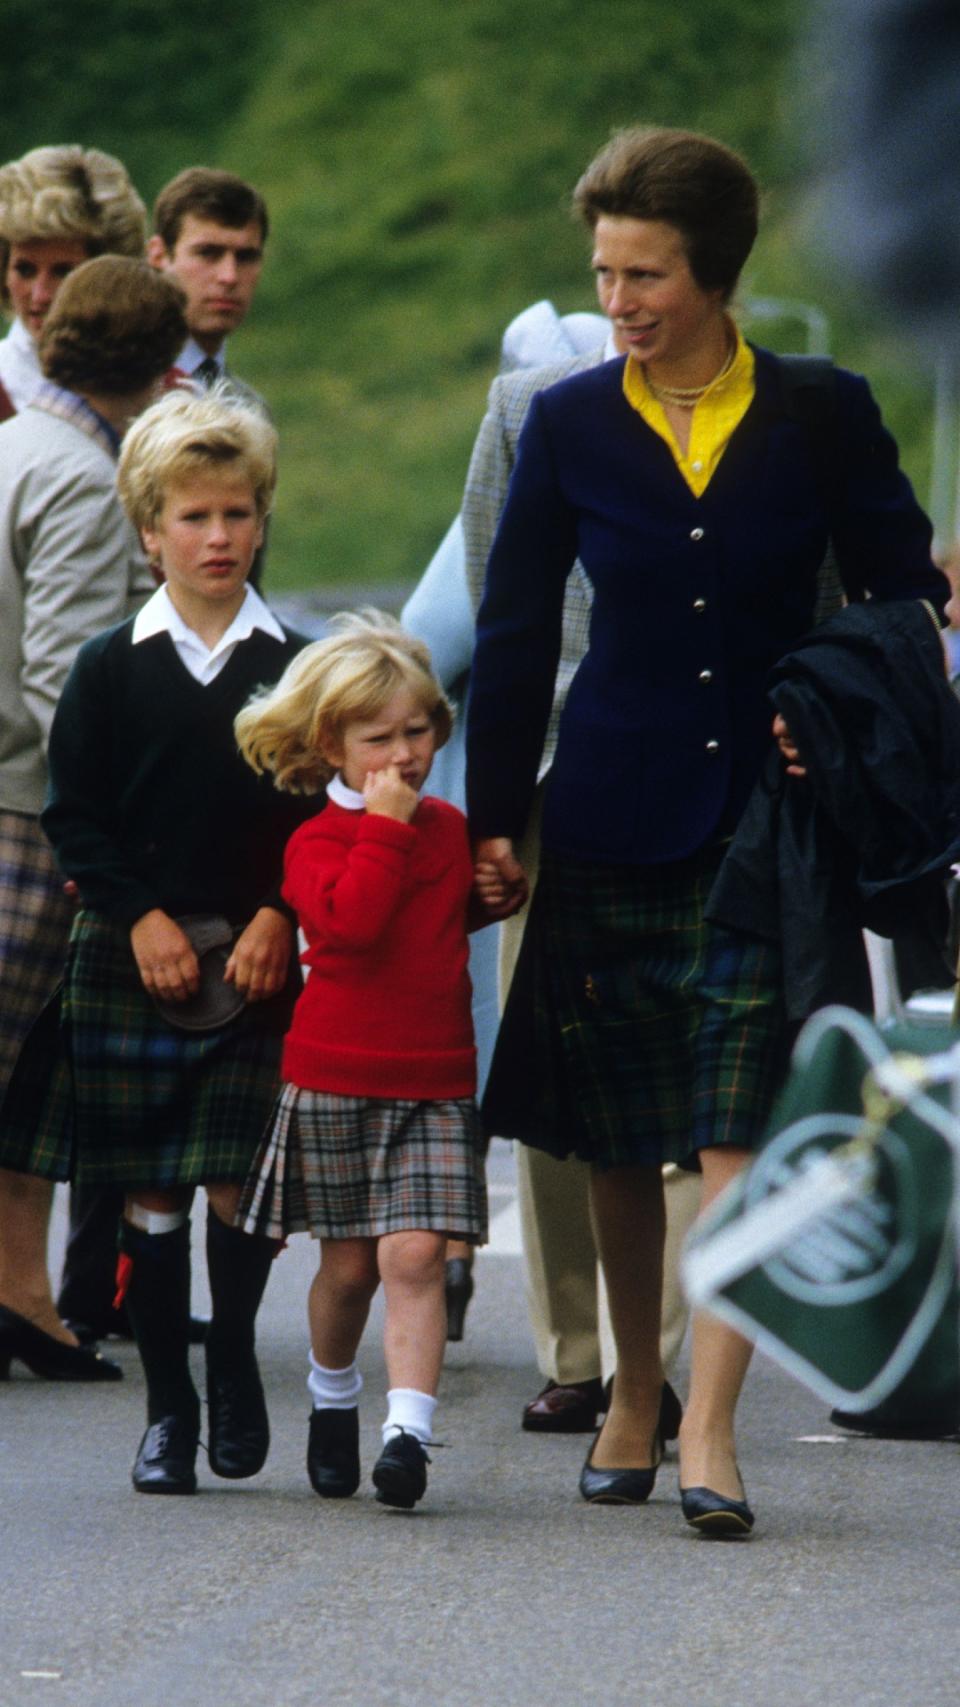 Princess Anne with her two children, Peter Phillips and Zara Phillips (now Tindall)